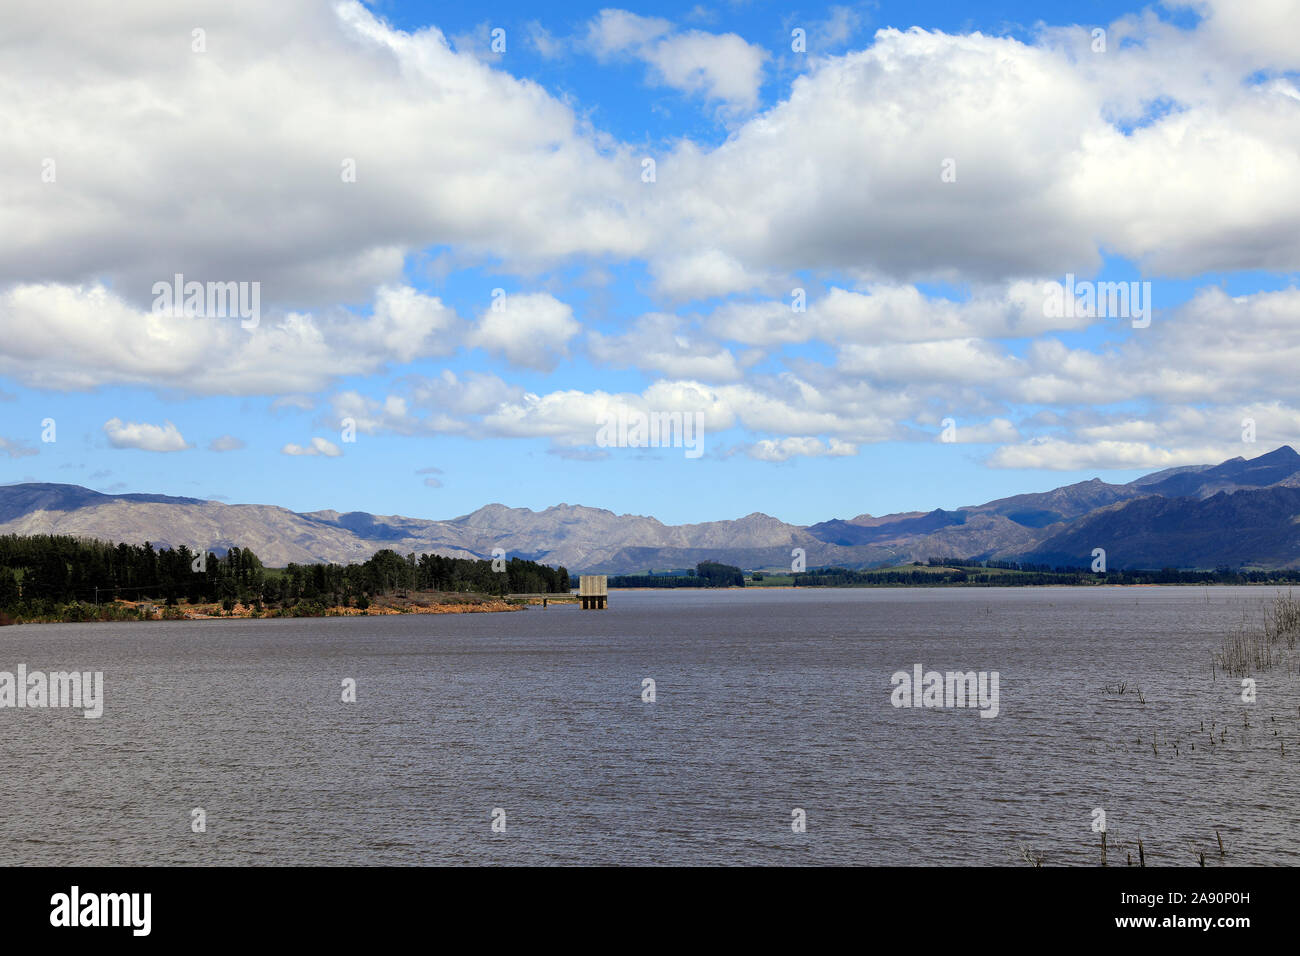 The Theewaterskloof dam near Villiersdorp in the Western Cape Province of South Africa showing recovery of the water level after the recent drought. Stock Photo